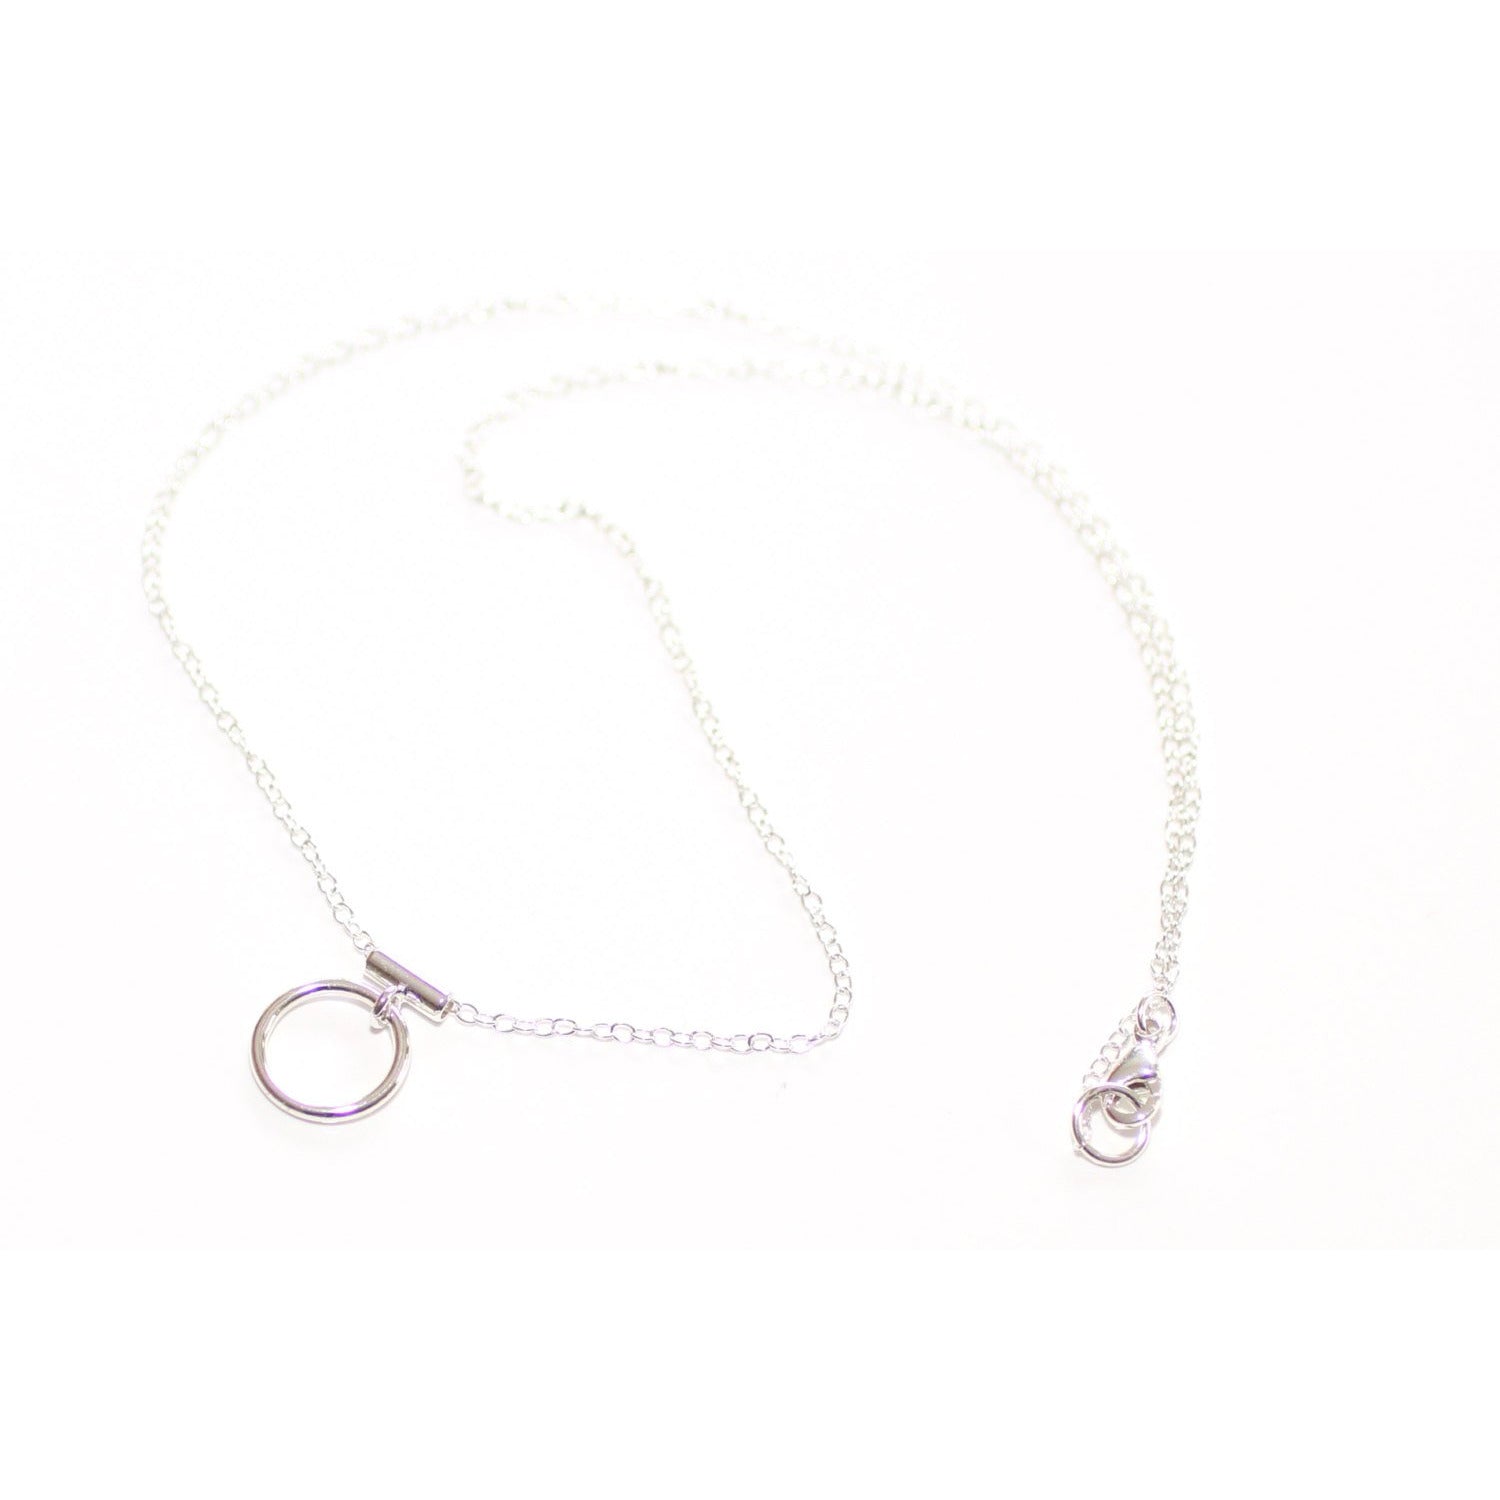 ELEGANT & DISCREET LIGHT SUBMISSIVE CHAIN DAY COLLAR, STERLING SILVER.